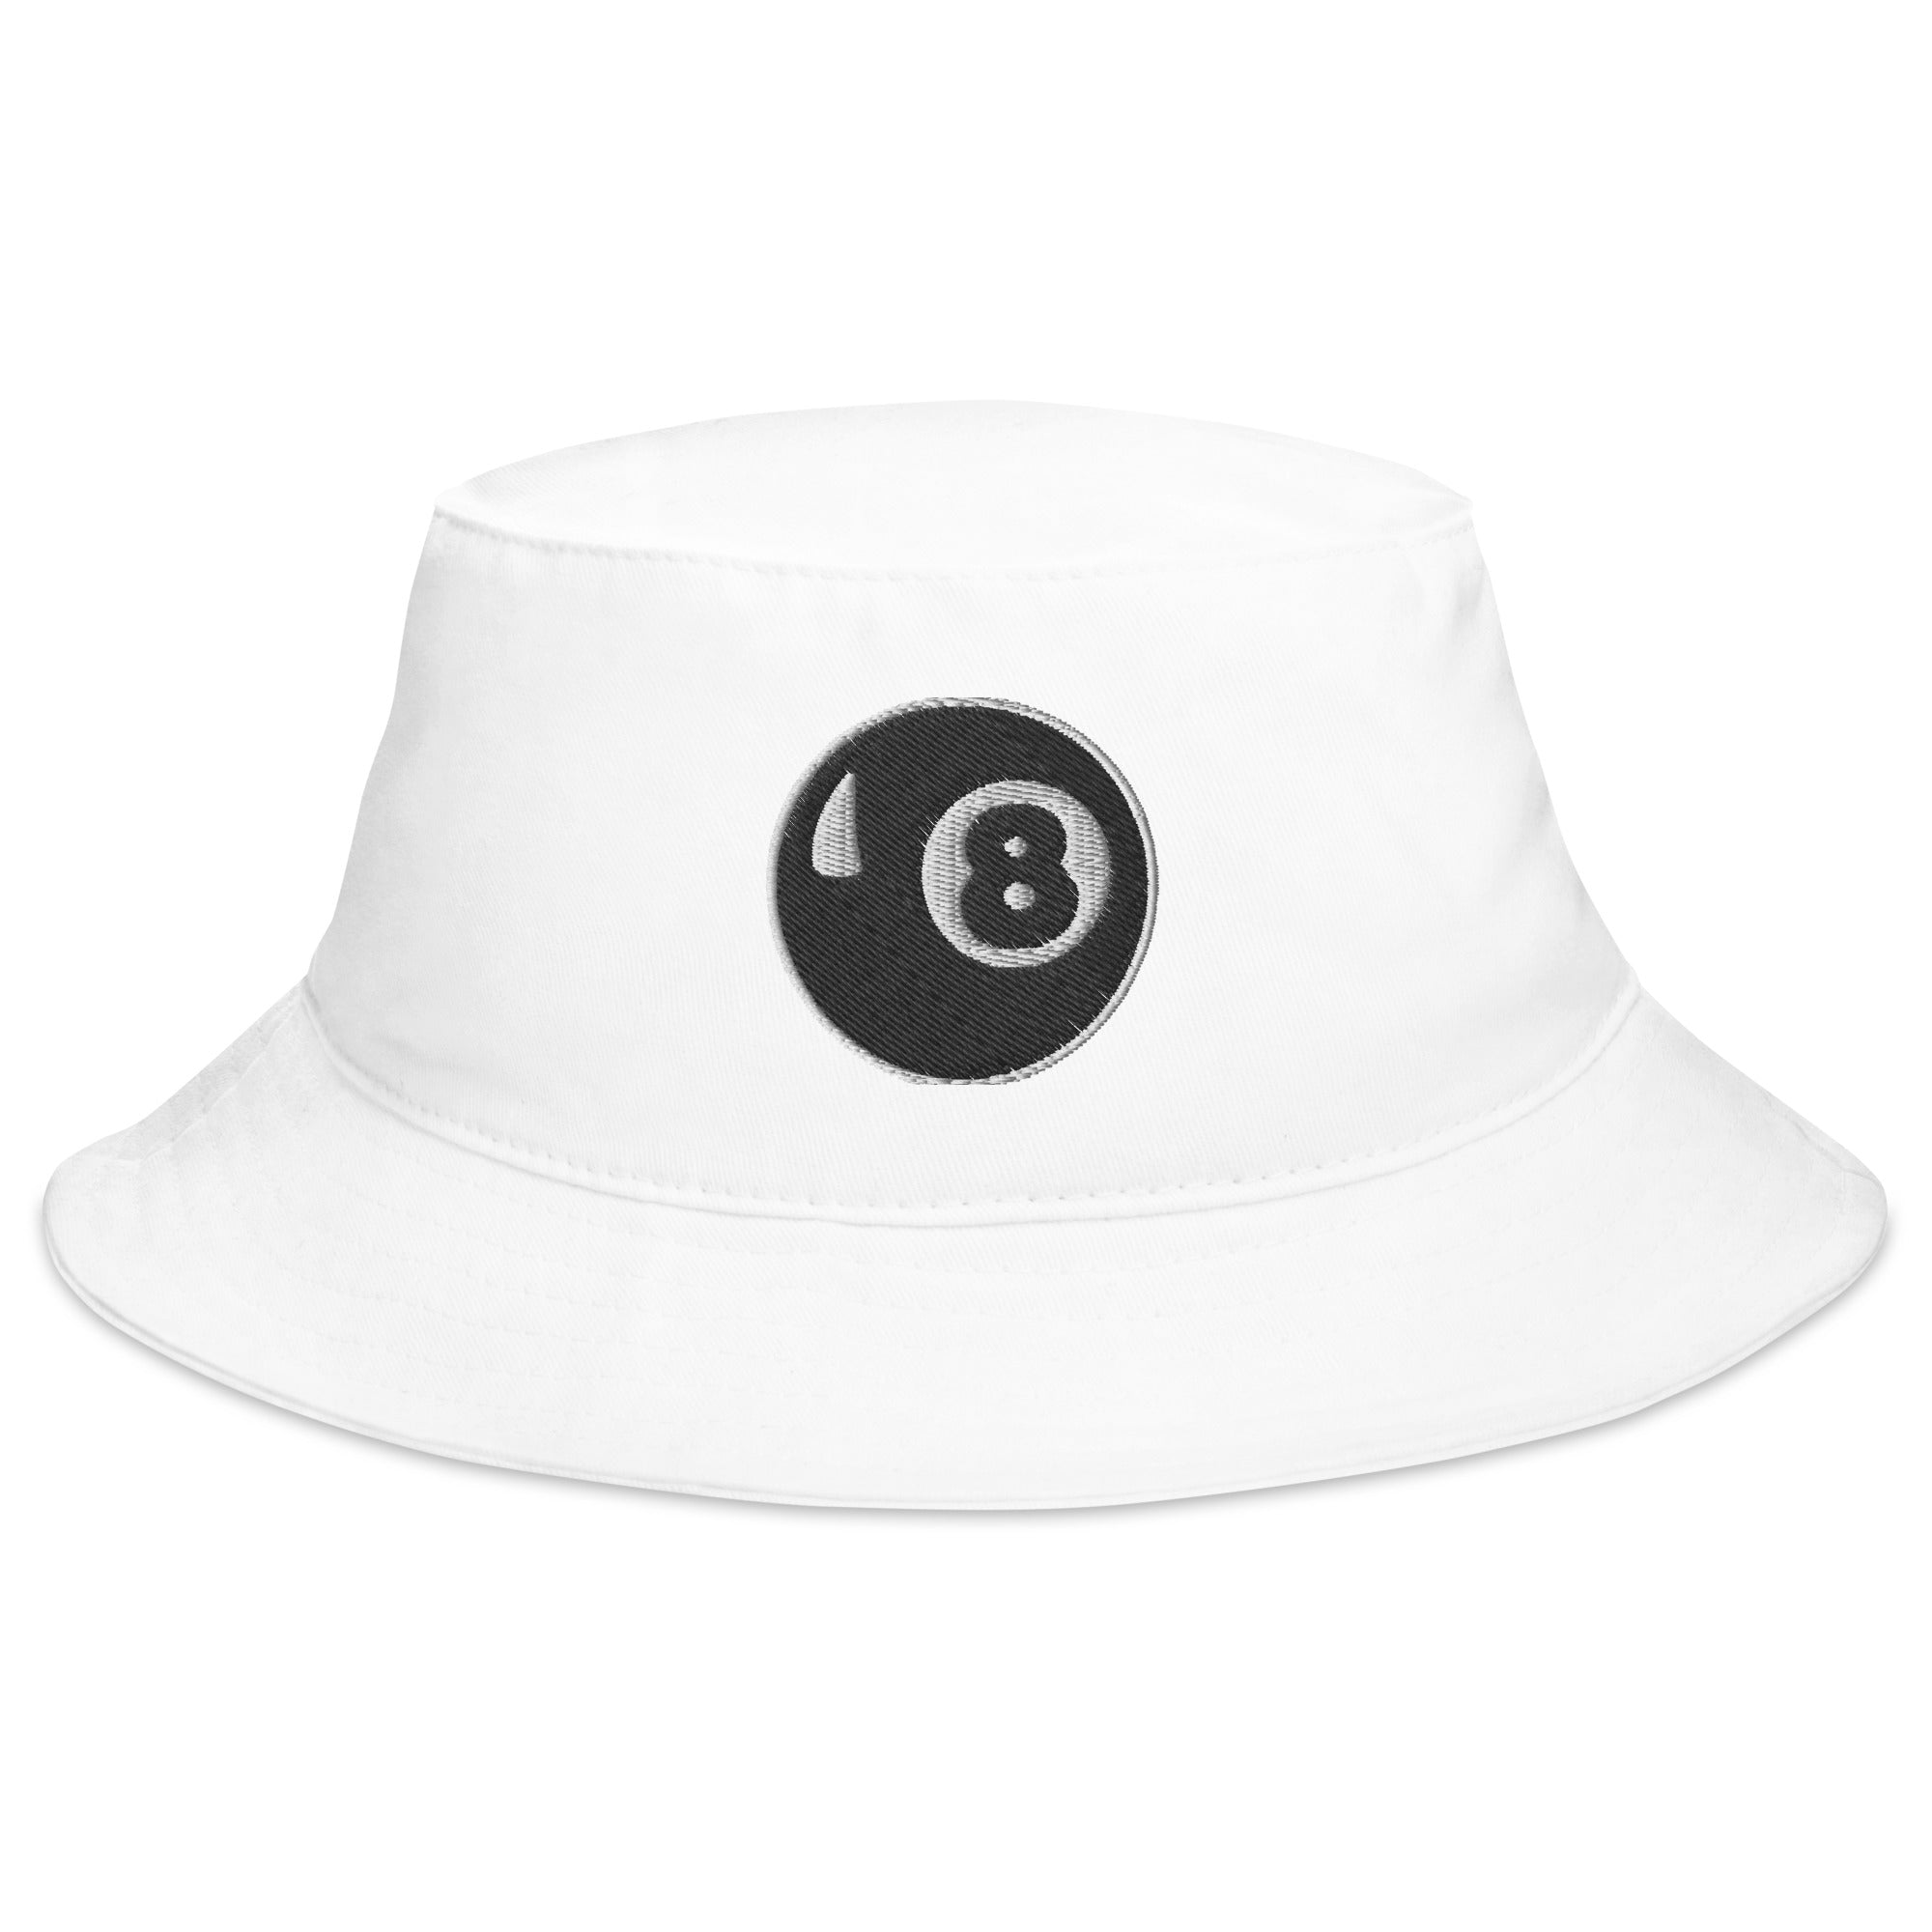 8 Ball Pool Billiards Embroidered Bucket Hat Eight Balled Game Room